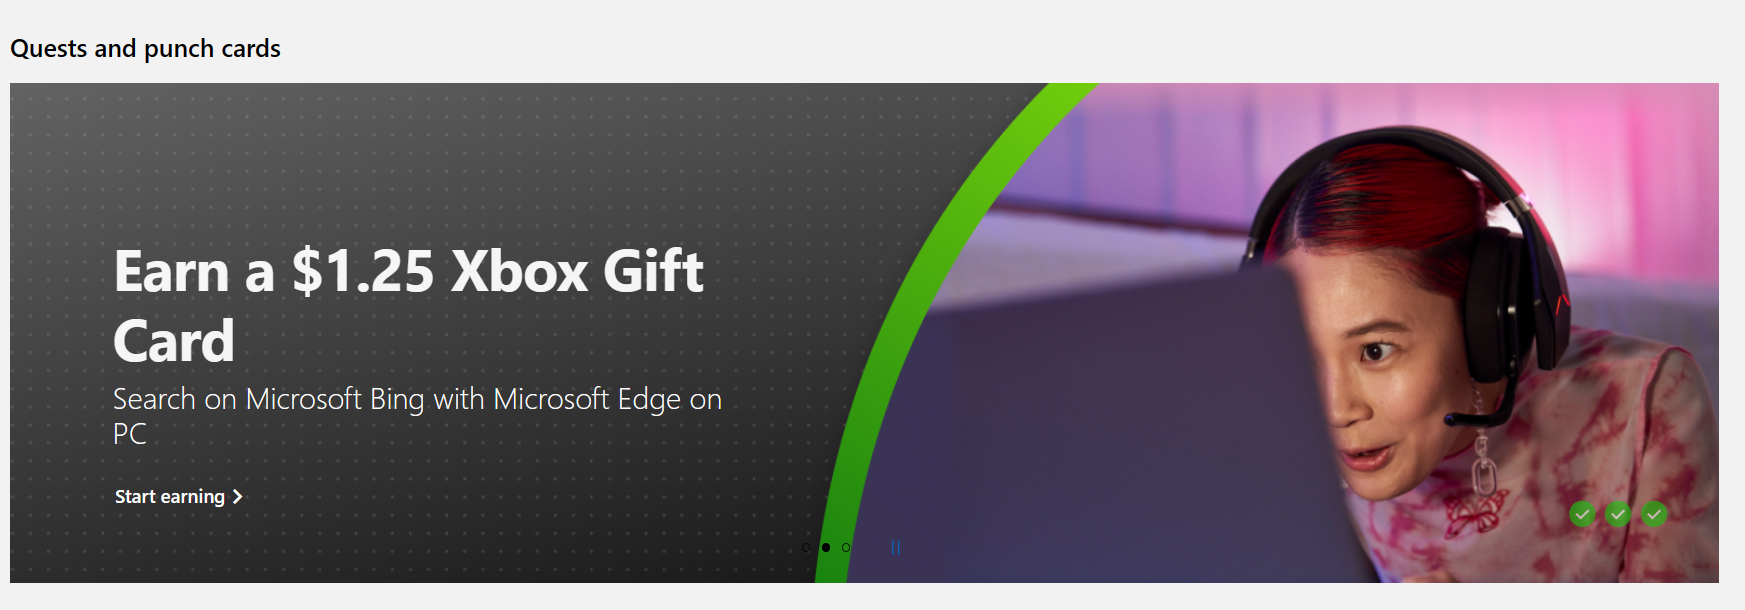 Select Microsoft Rewards Members: Use Edge to Search w/ Bing for 5 Days Get $1.25 Xbox Gift Card